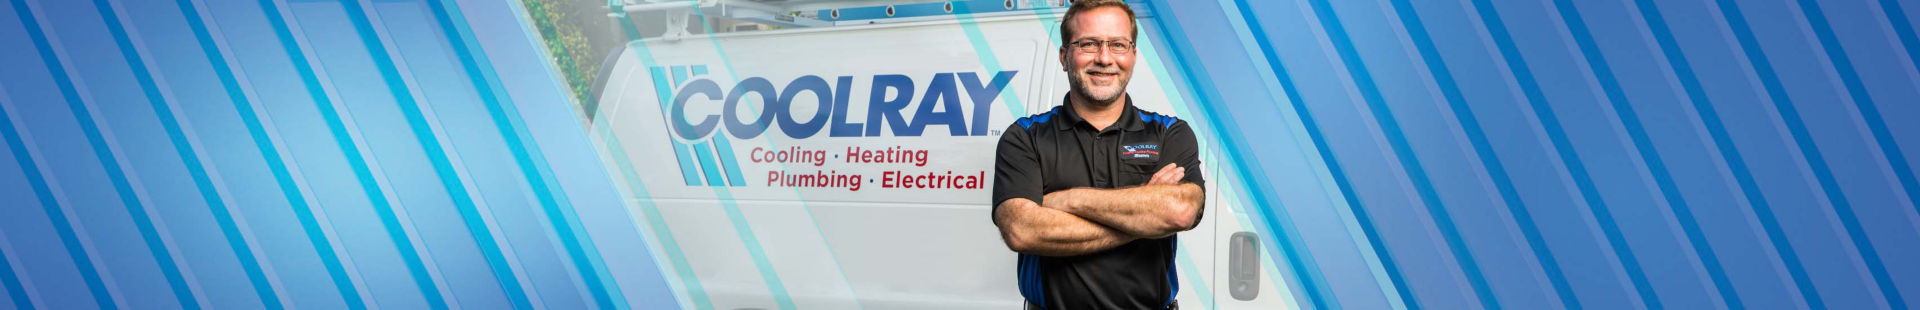 Heating technician and Coolray service vehicle